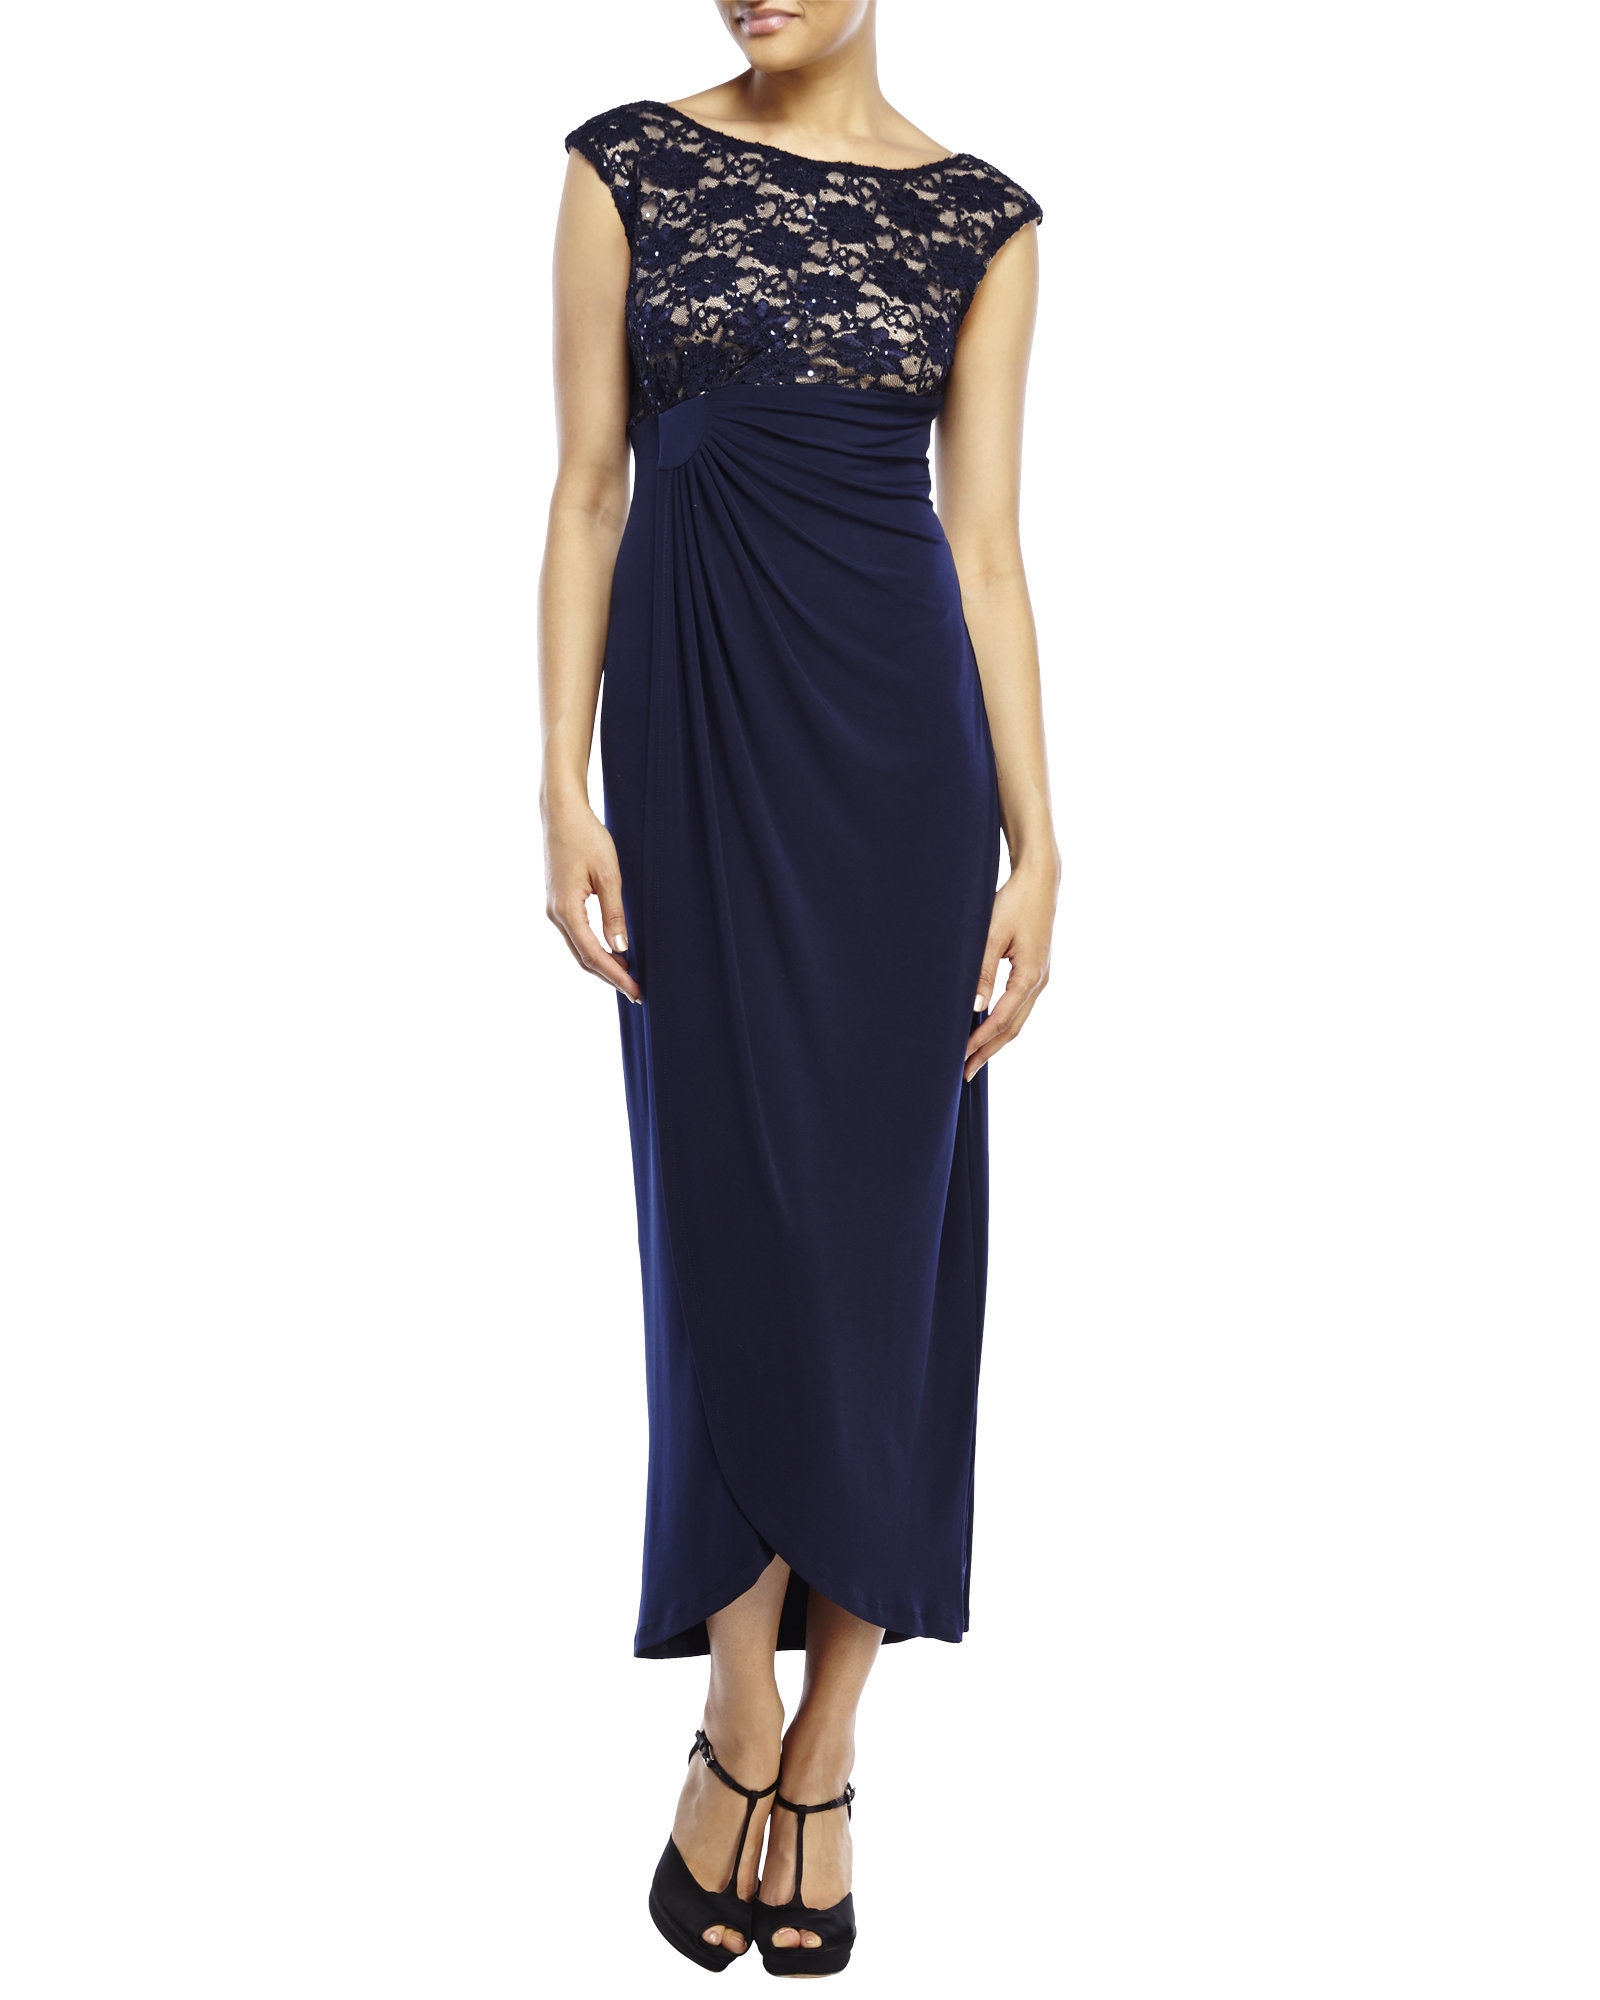 connected apparel navy blue dress